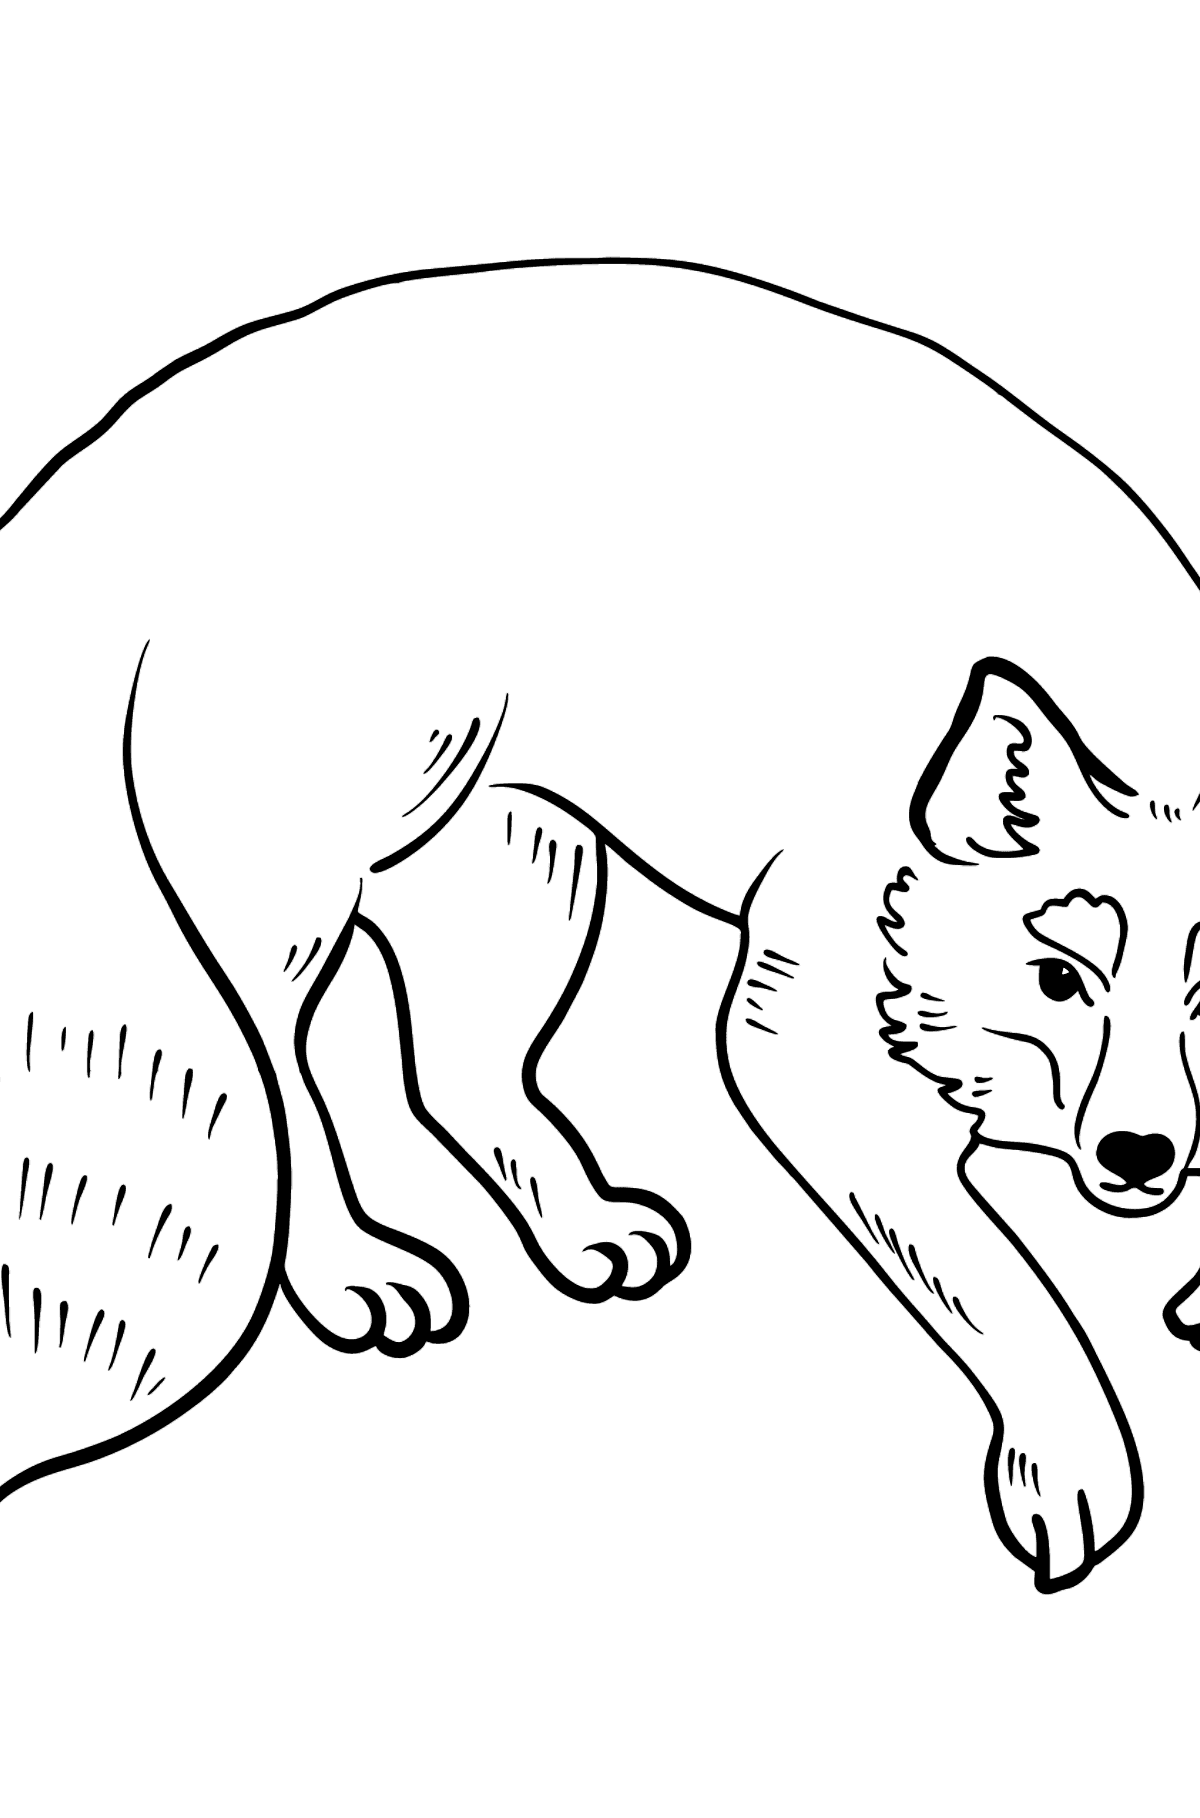 Fox coloring page - Coloring Pages for Kids